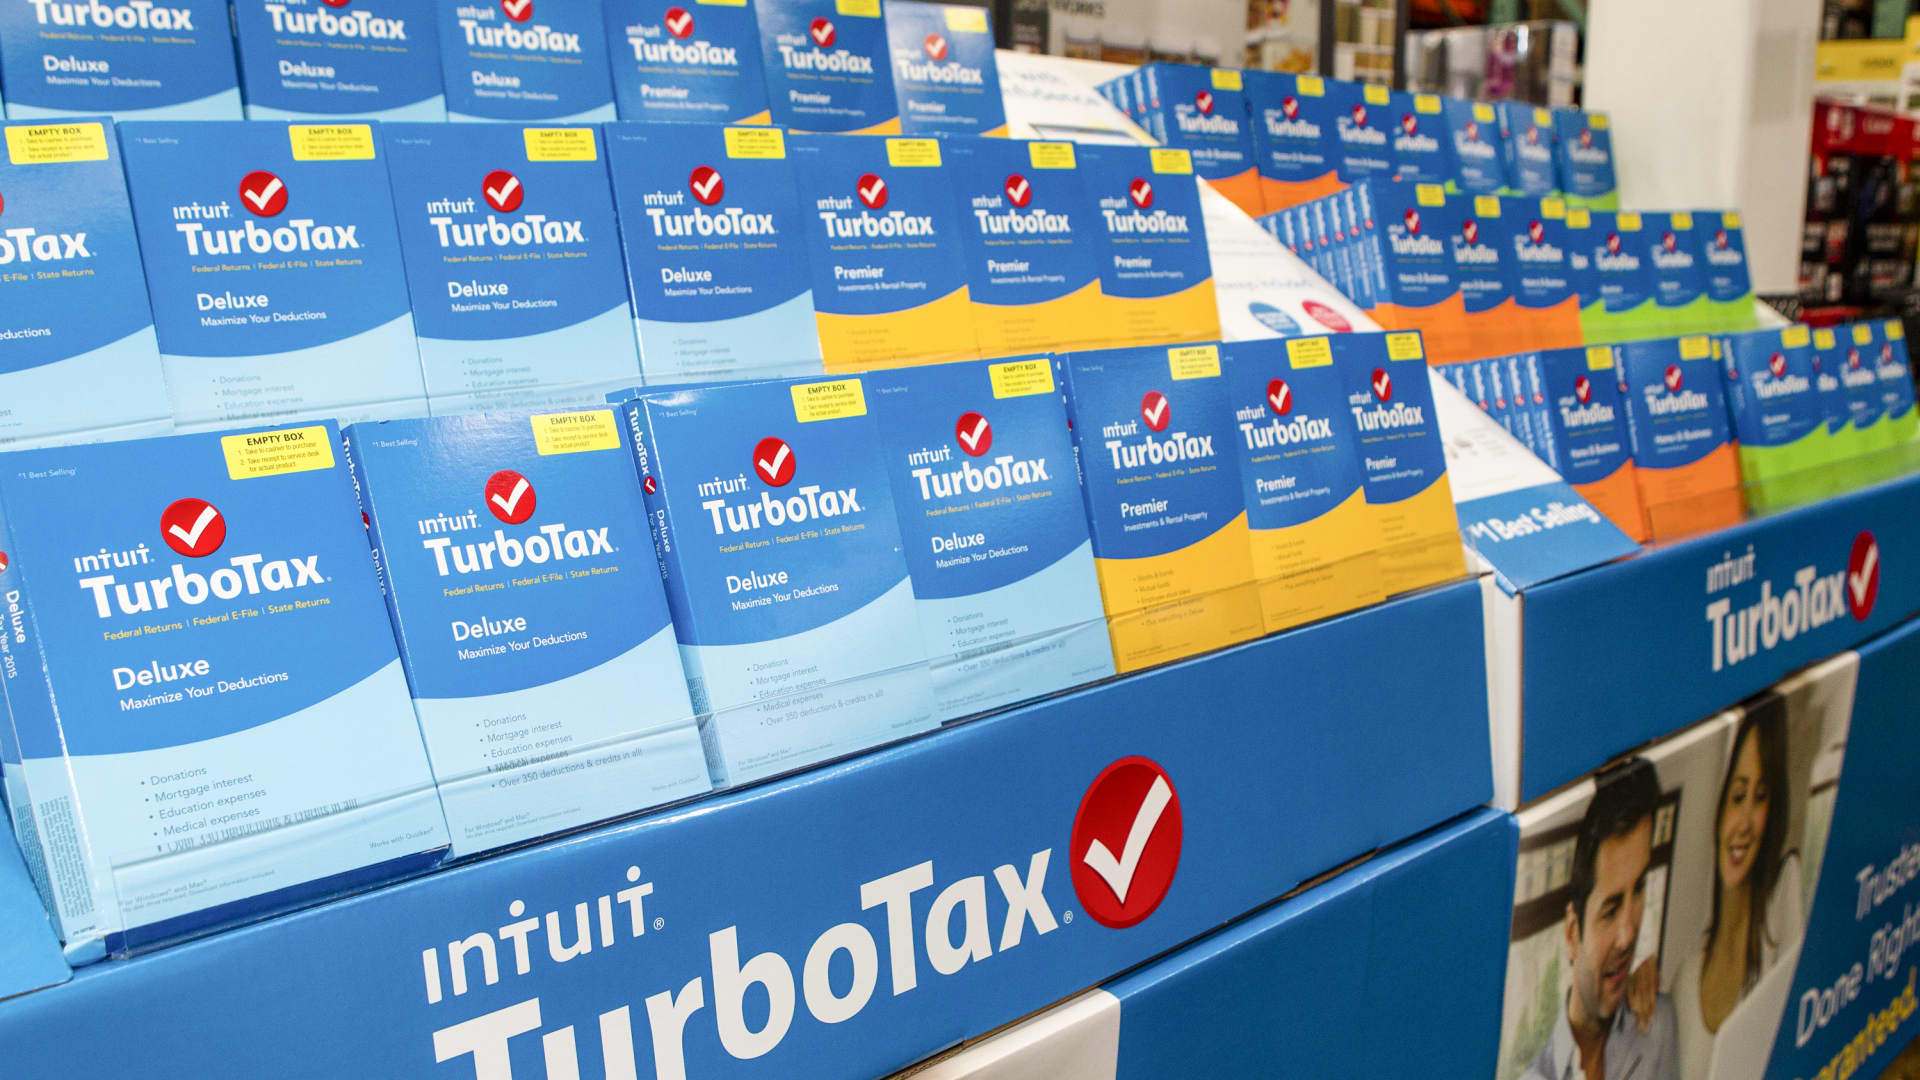 TurboTax maker Intuit deceived users with offers of 'free' tax products, FTC judge rules